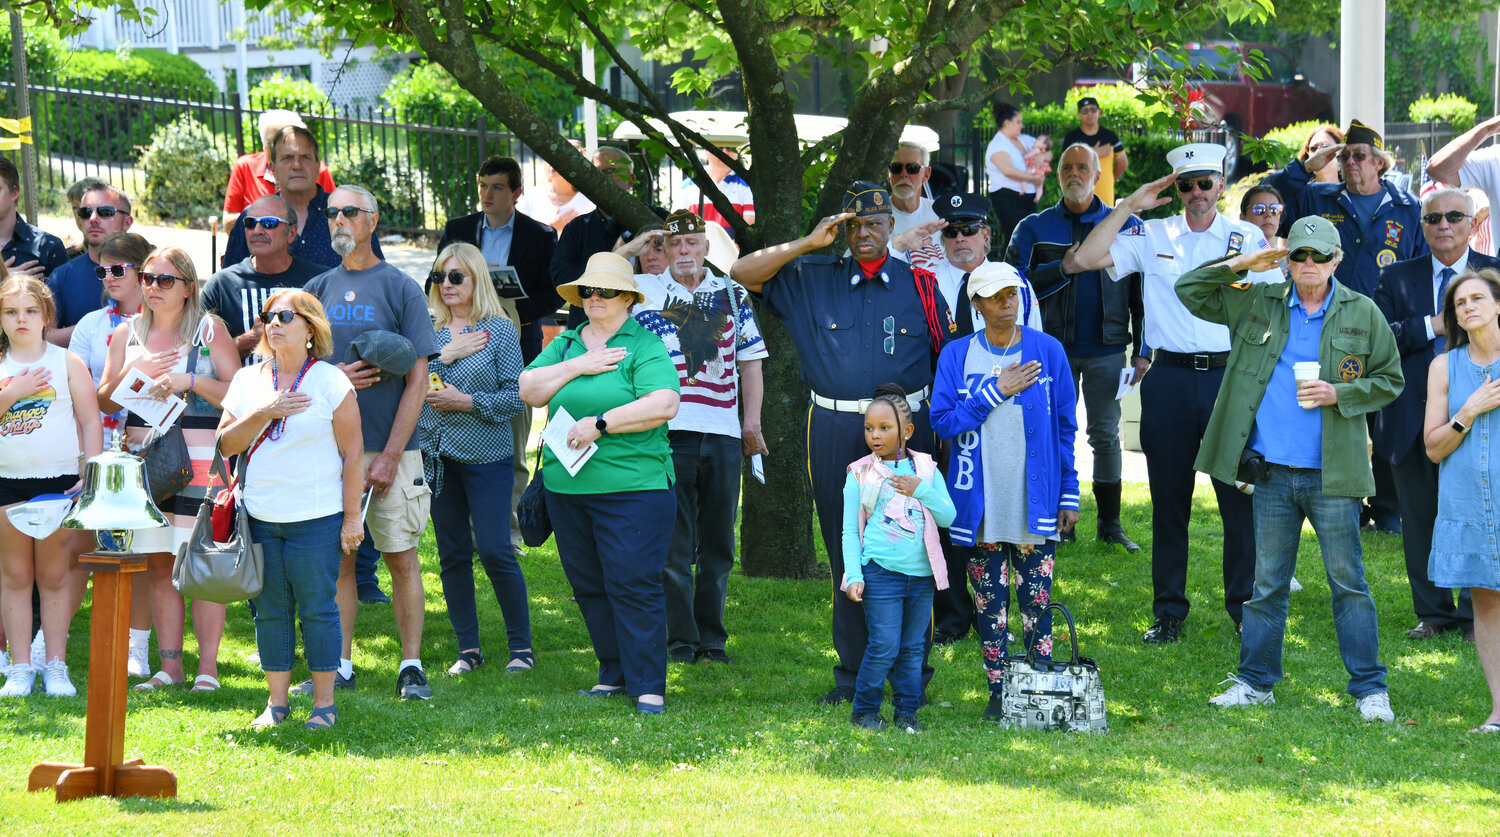 Glen Cove’s veterans and residents held their hands to their hearts while reciting the Pledge of Allegiance. The pledge celebrates patriotism and loyalty to the country.